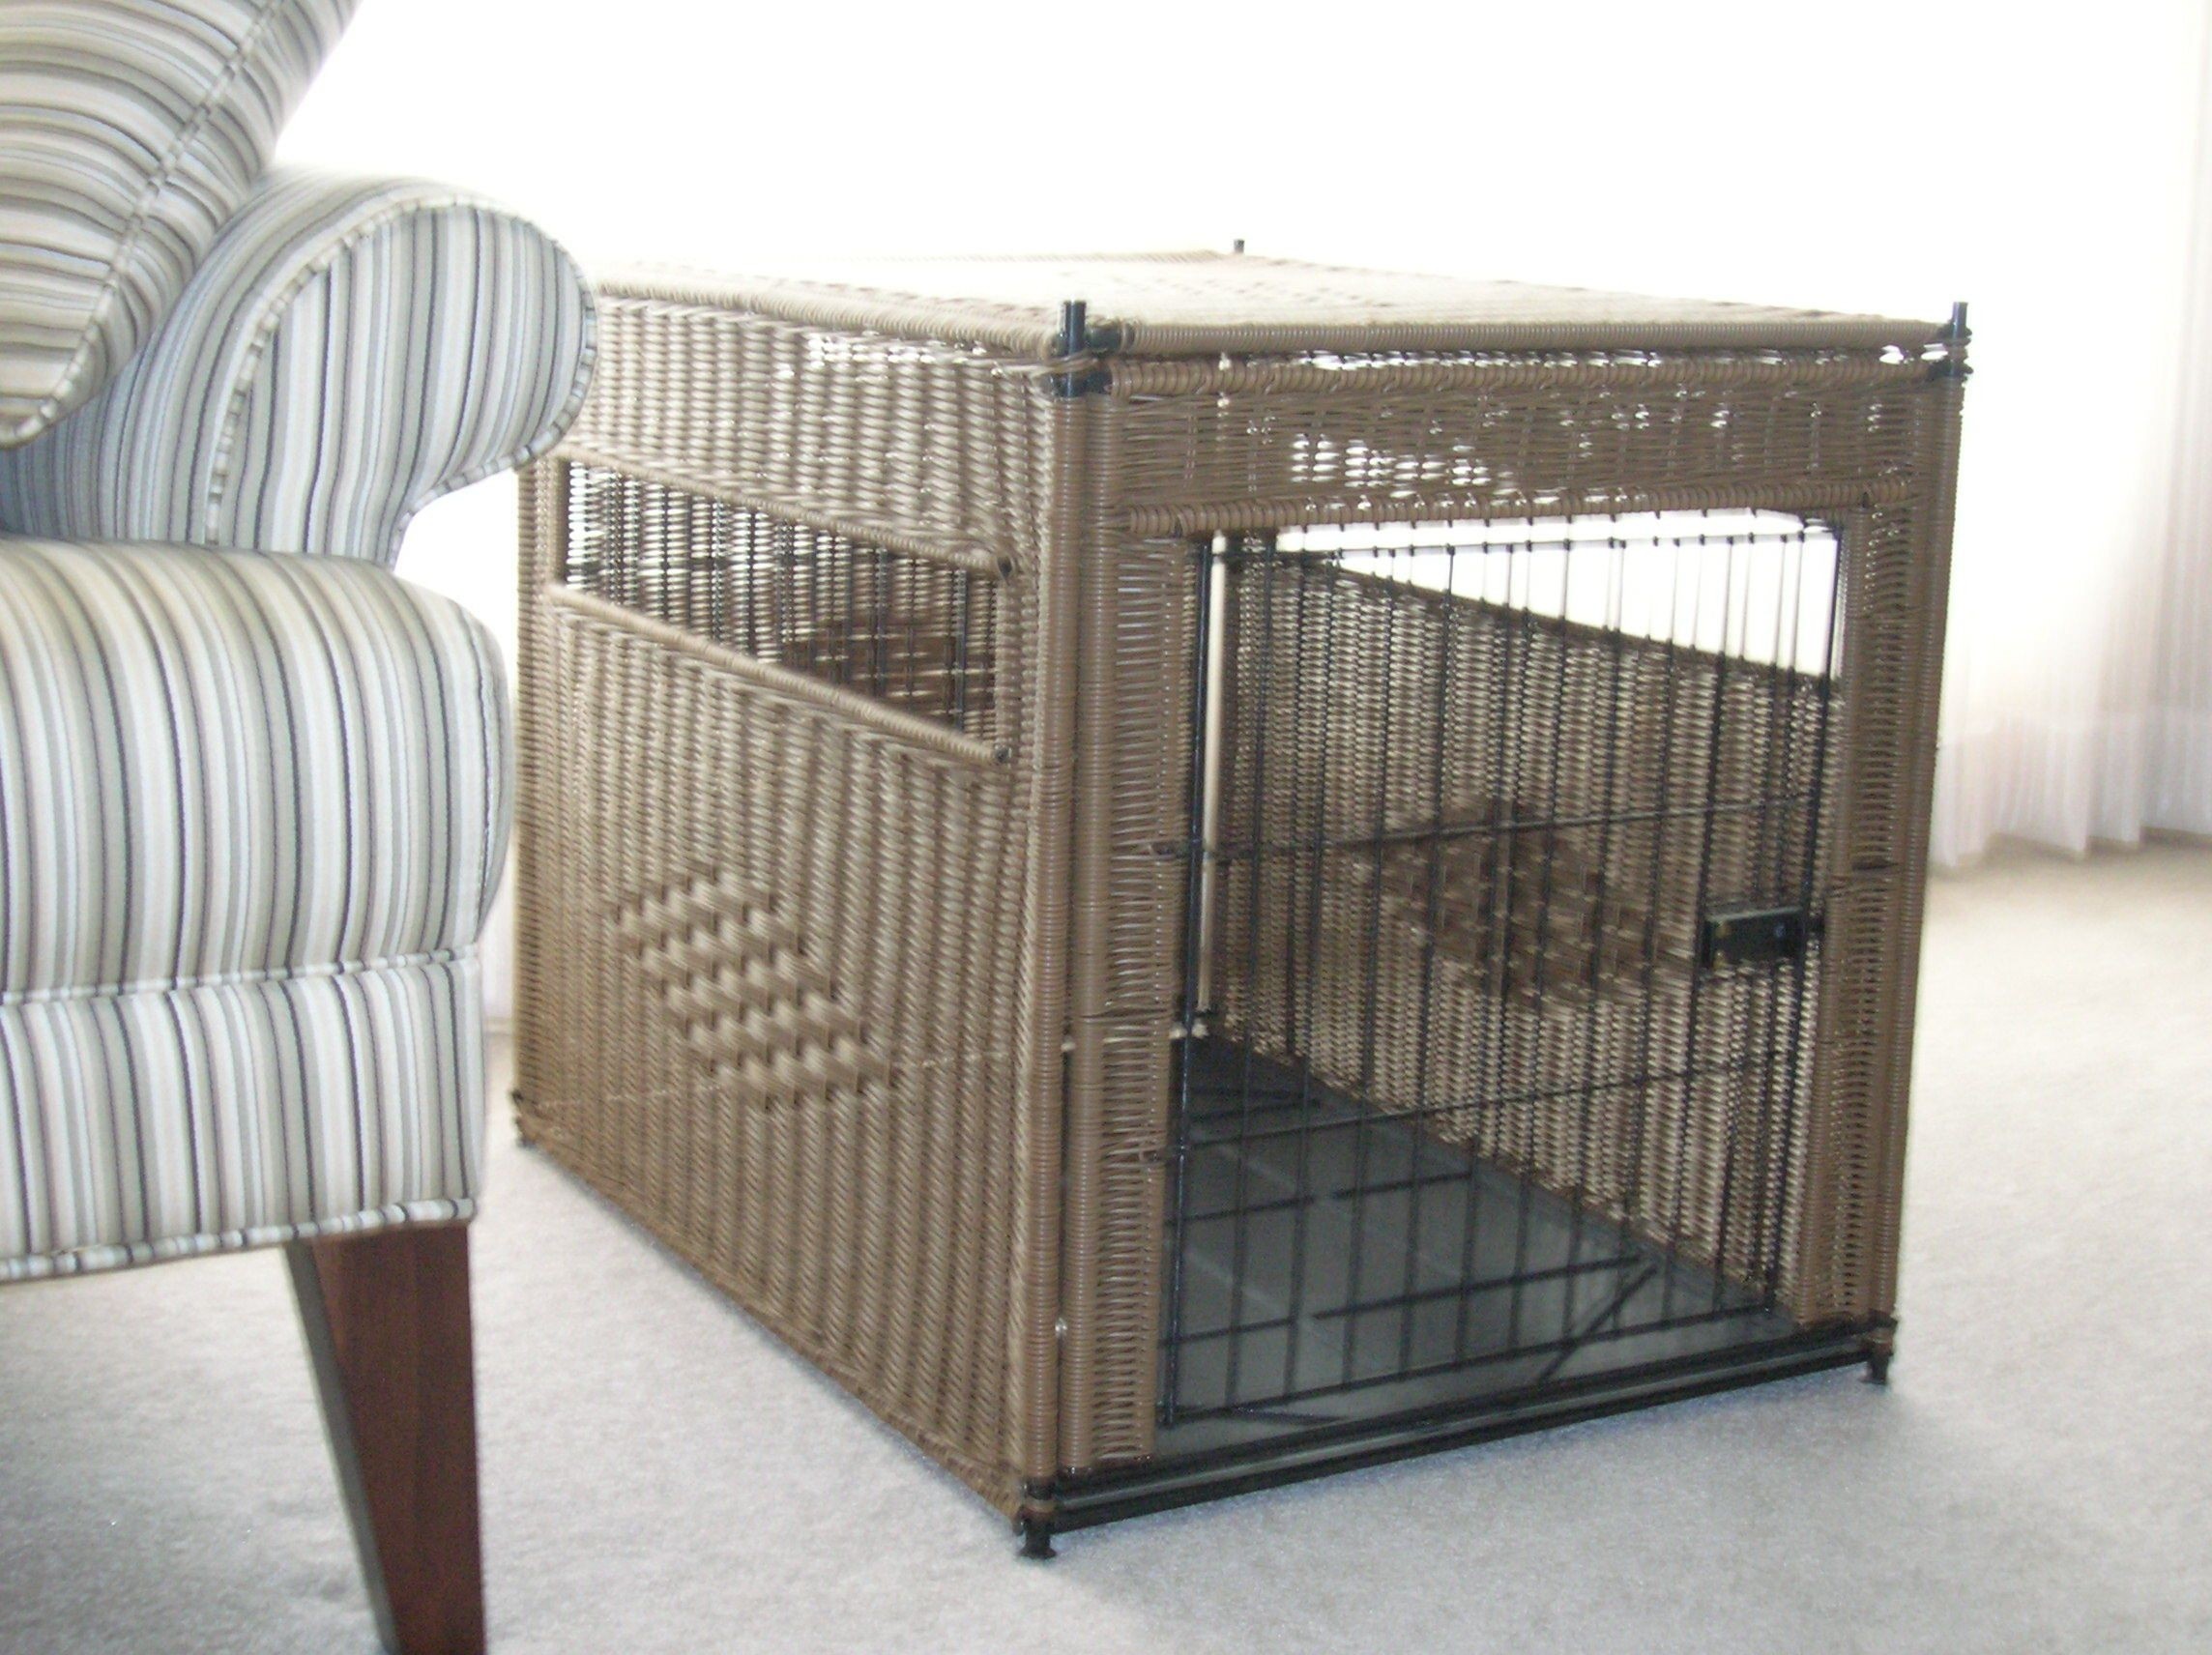 Decorative wicker dog crate in brown color with square